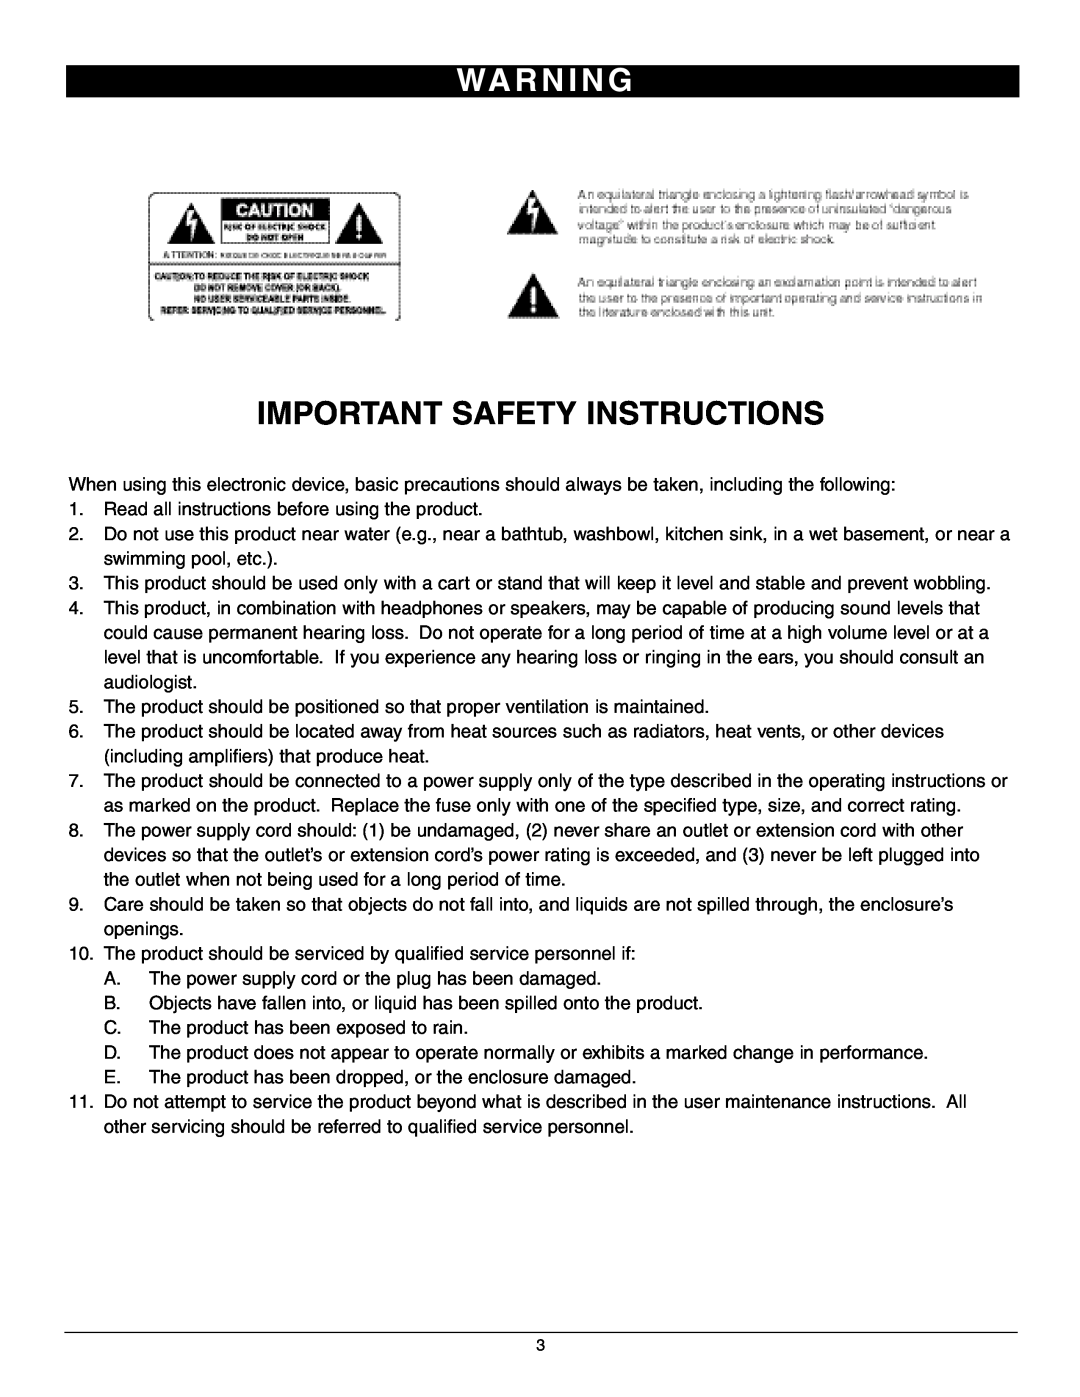 Nady Systems 3WA1700 owner manual Wa R N I N G, Important Safety Instructions 